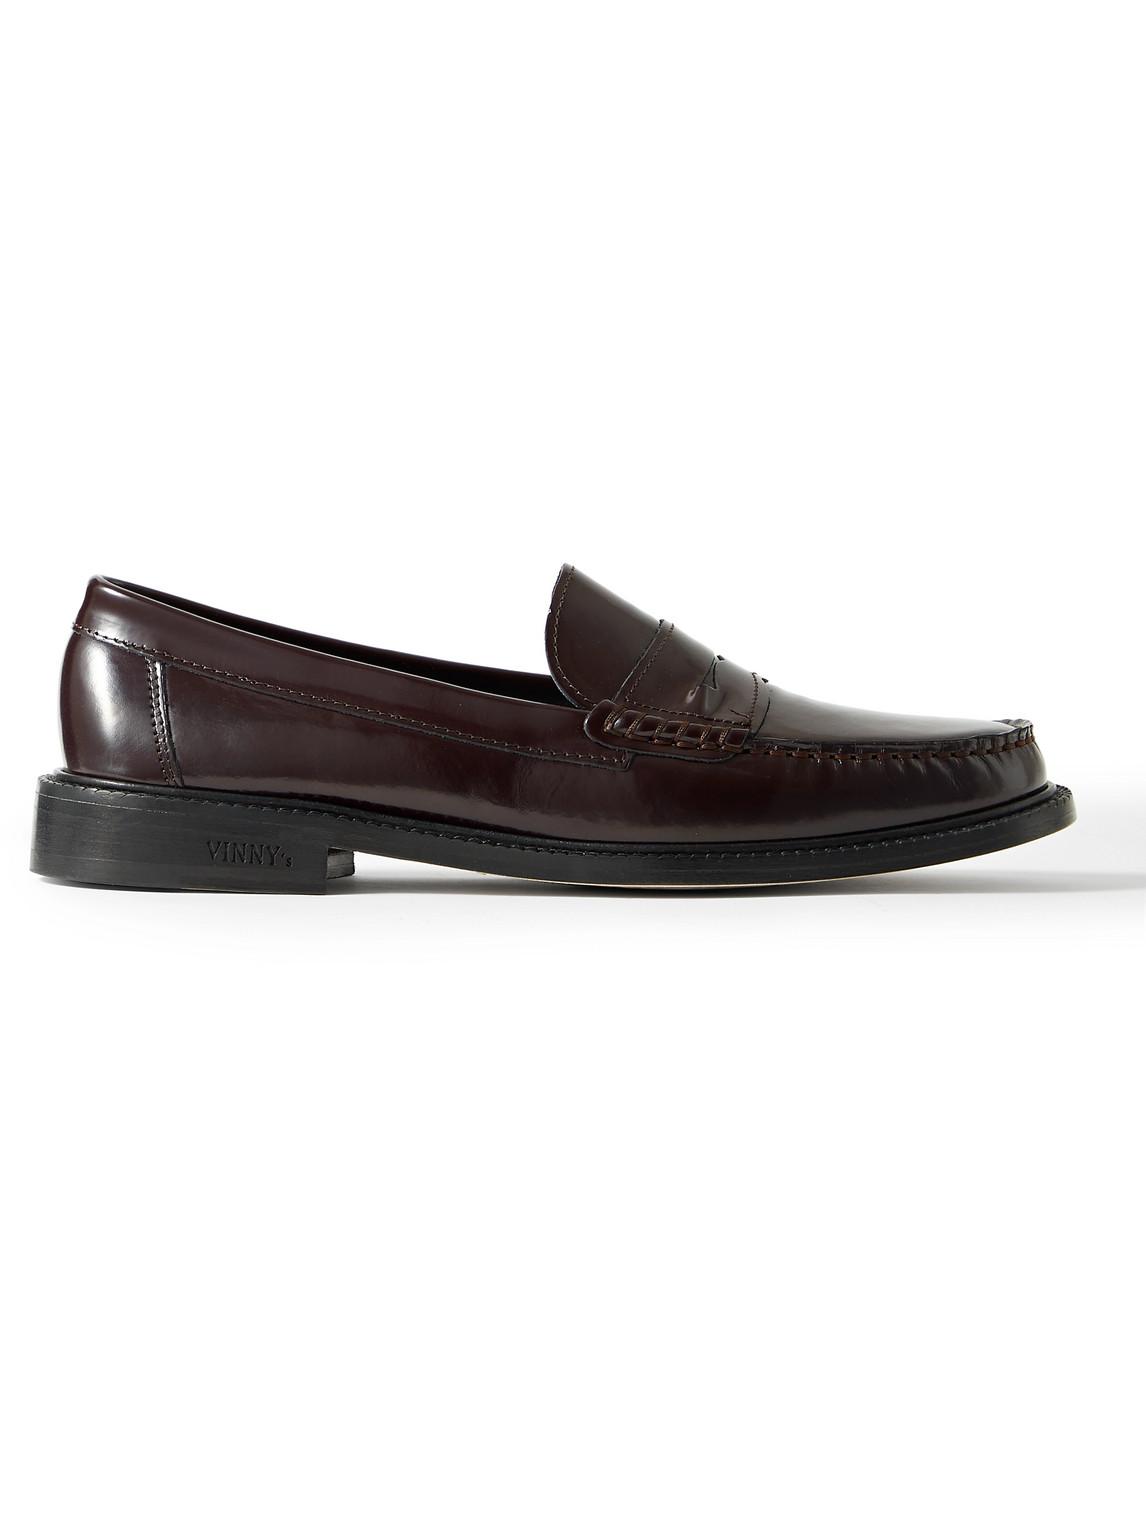 VINNY'S Yardee Leather Penny Loafers in Black for Men | Lyst